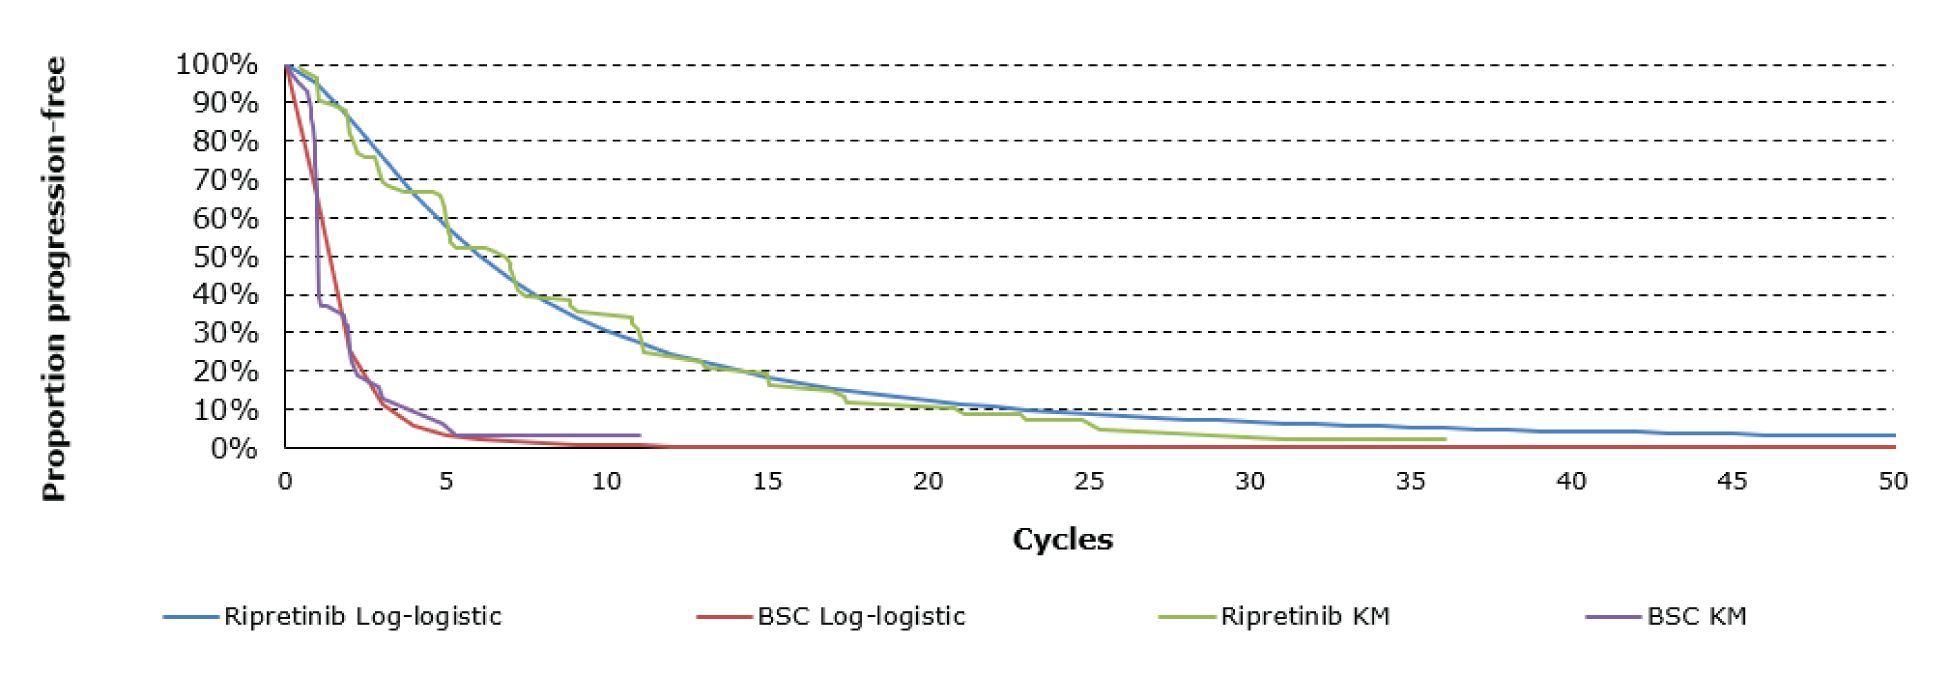 Two Kaplan-Meier curves for progression-free survival for ripretinib and best supportive care. The lower of the 2 curves is best supportive care and the higher is ripretinib. Both Kaplan-Meier curves are based on the INVICTUS trial (N = 129; mean age = 60 years). Survival curves were statistically fitted to the observed Kaplan-Meier survival data and used to extrapolate progression-free survival beyond the trial period.